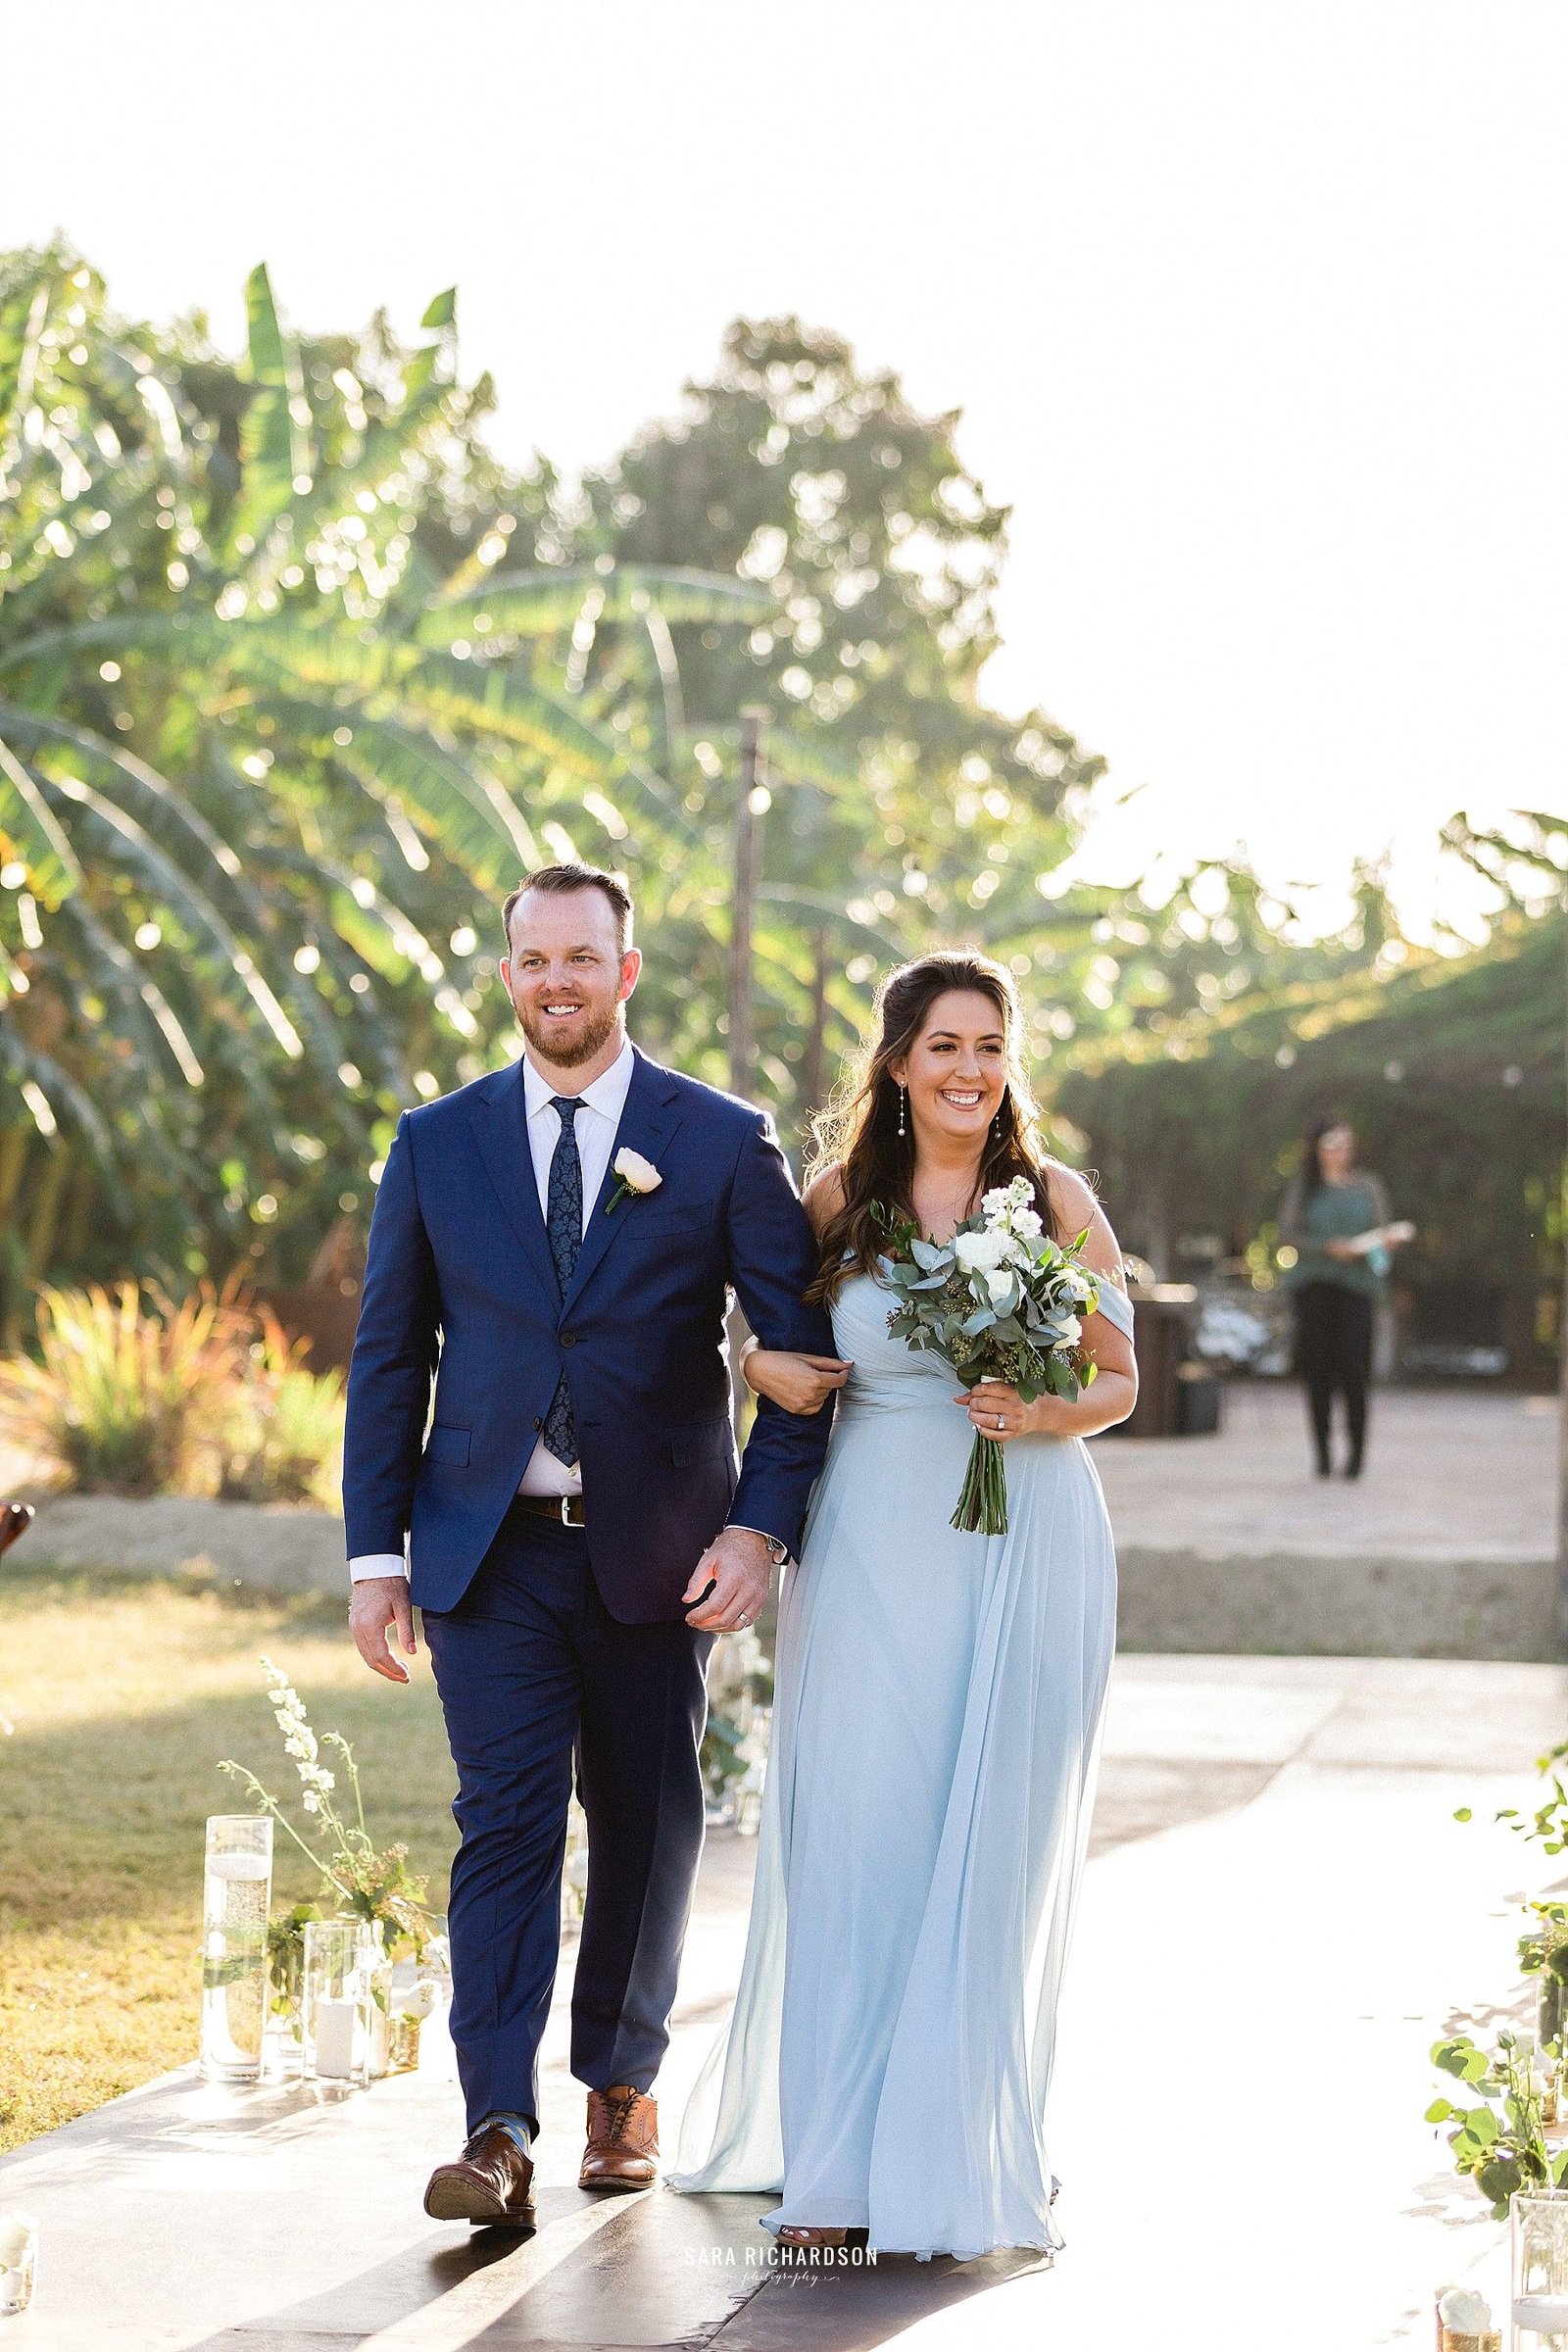 Bridesmaid and Groomsman walking down the aisle, making way for the beautiful Bride. This wedding took place in February of 2019, in Los Cabos Mexico. It is one of the biggest wedding destinations in the world.